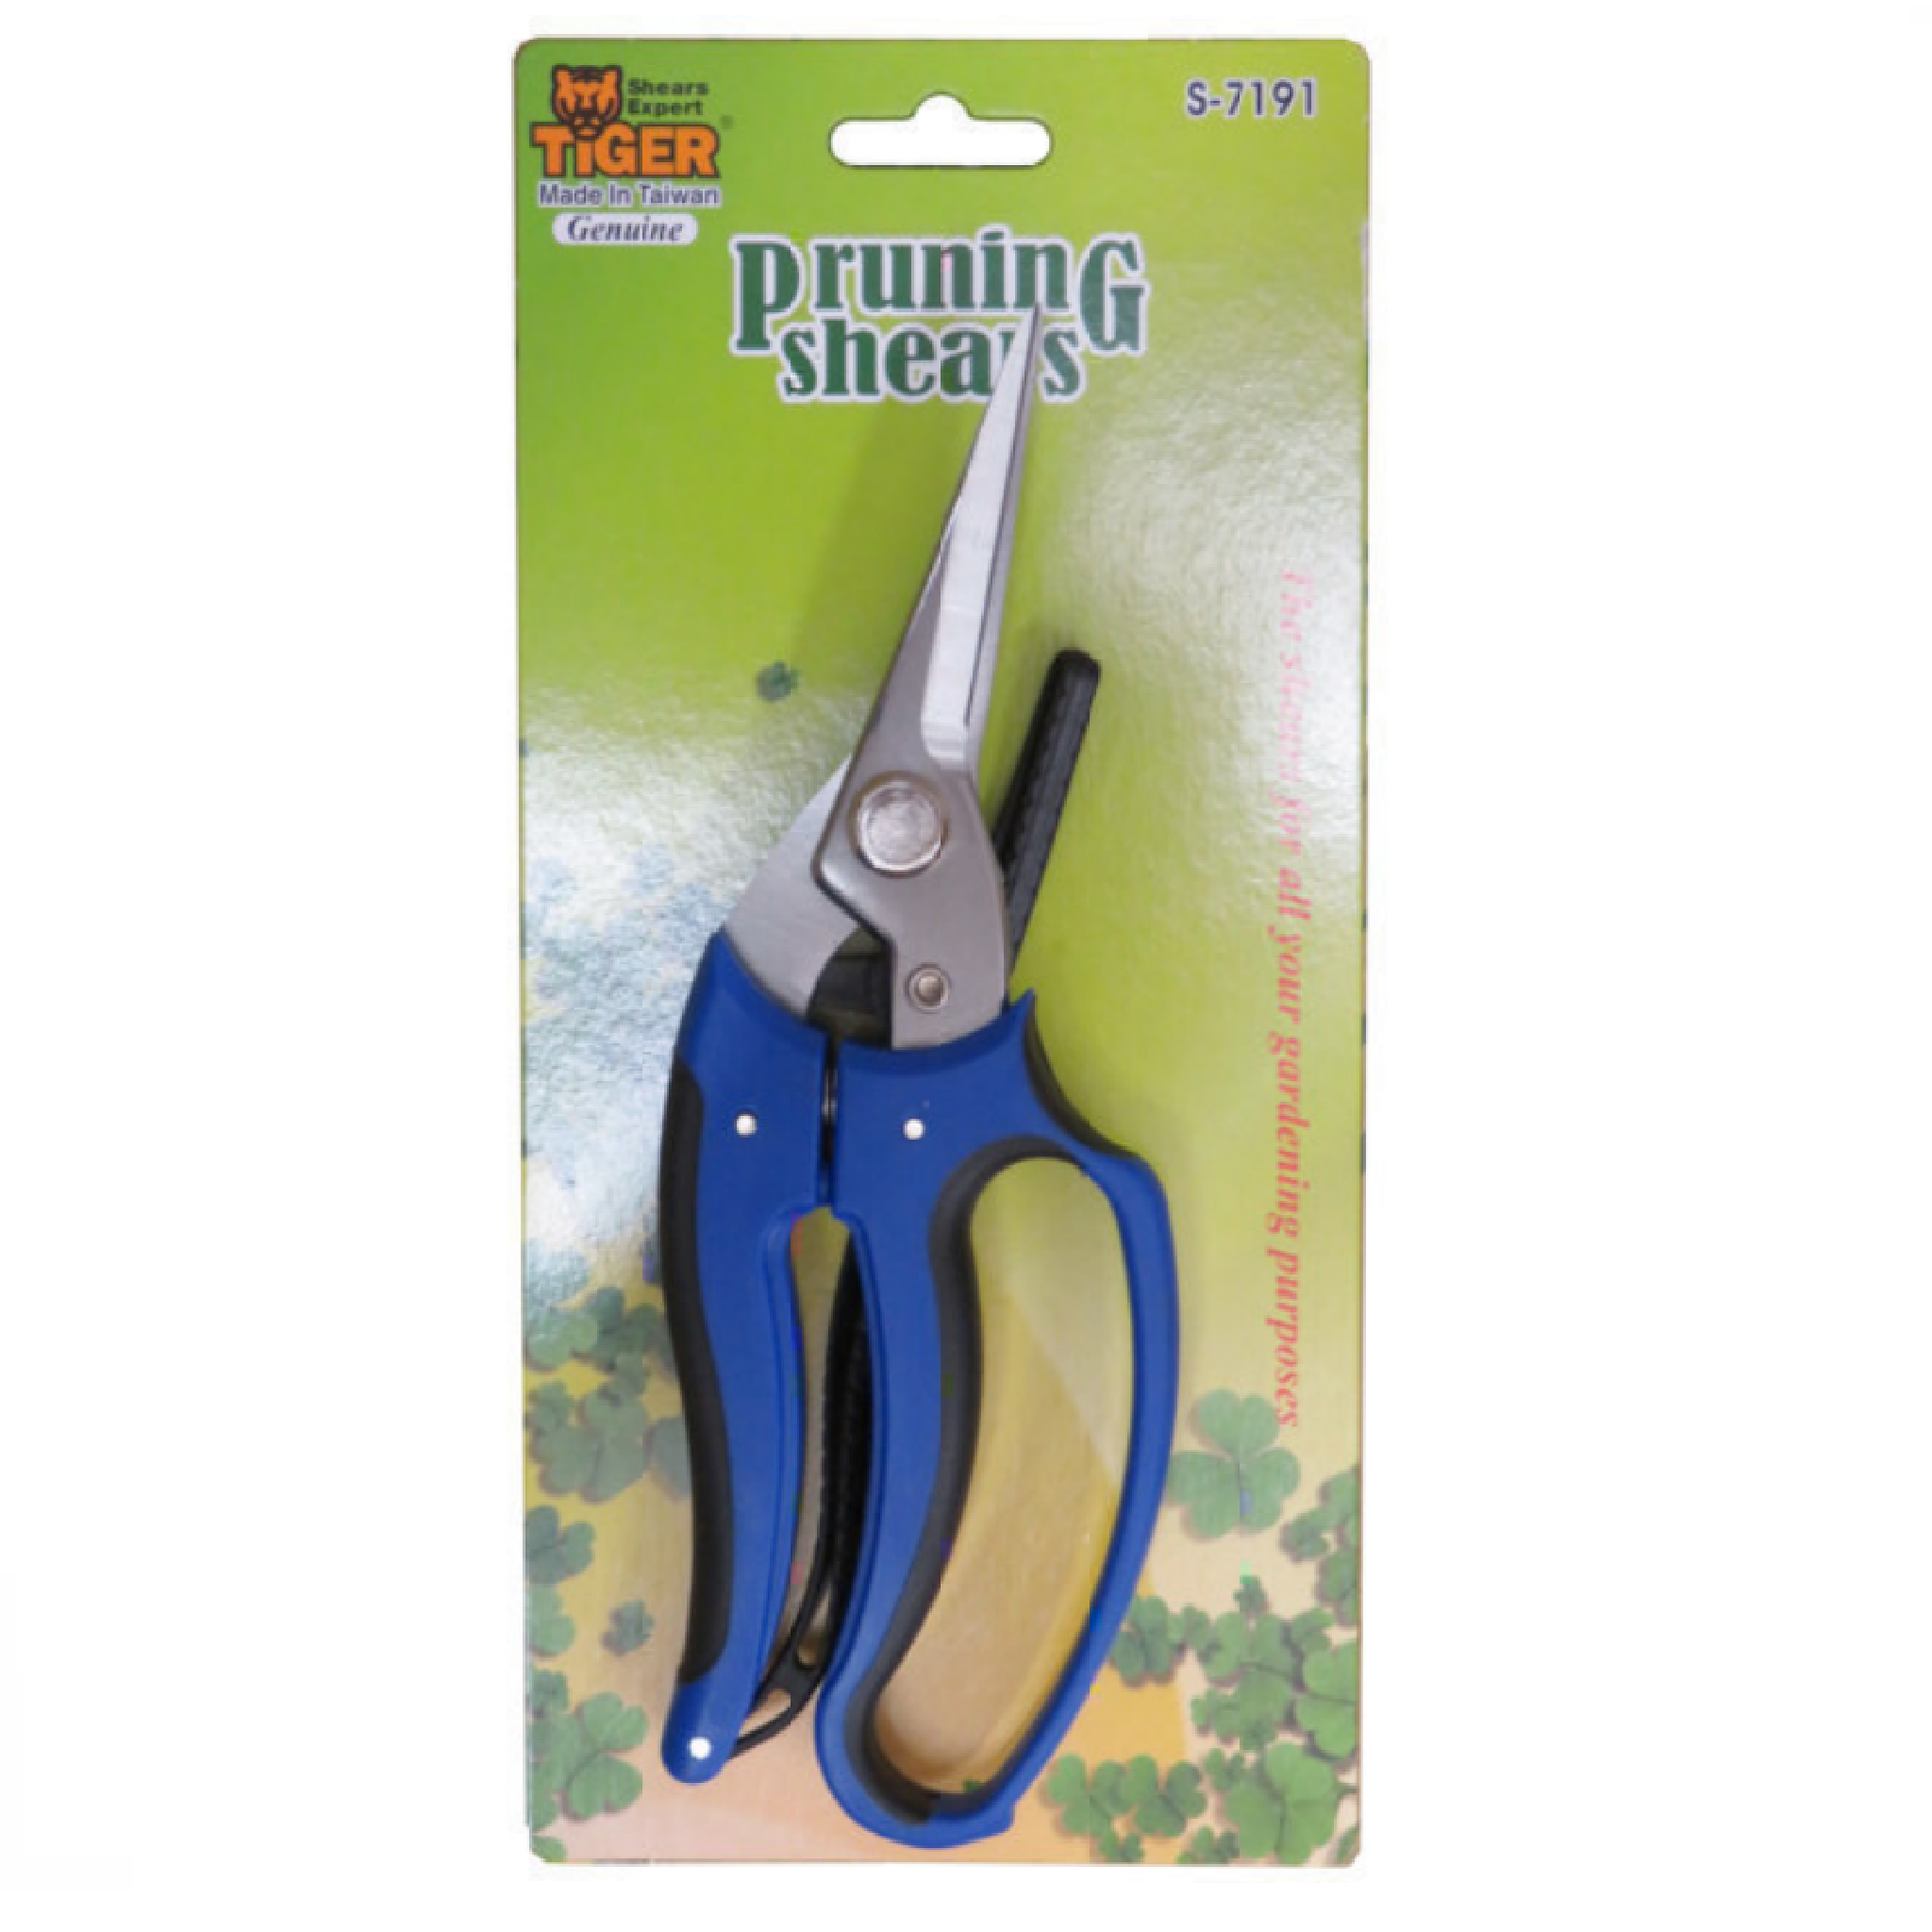 Tiger S7191 Stainless Steel Branch Scissors Pruning Shear